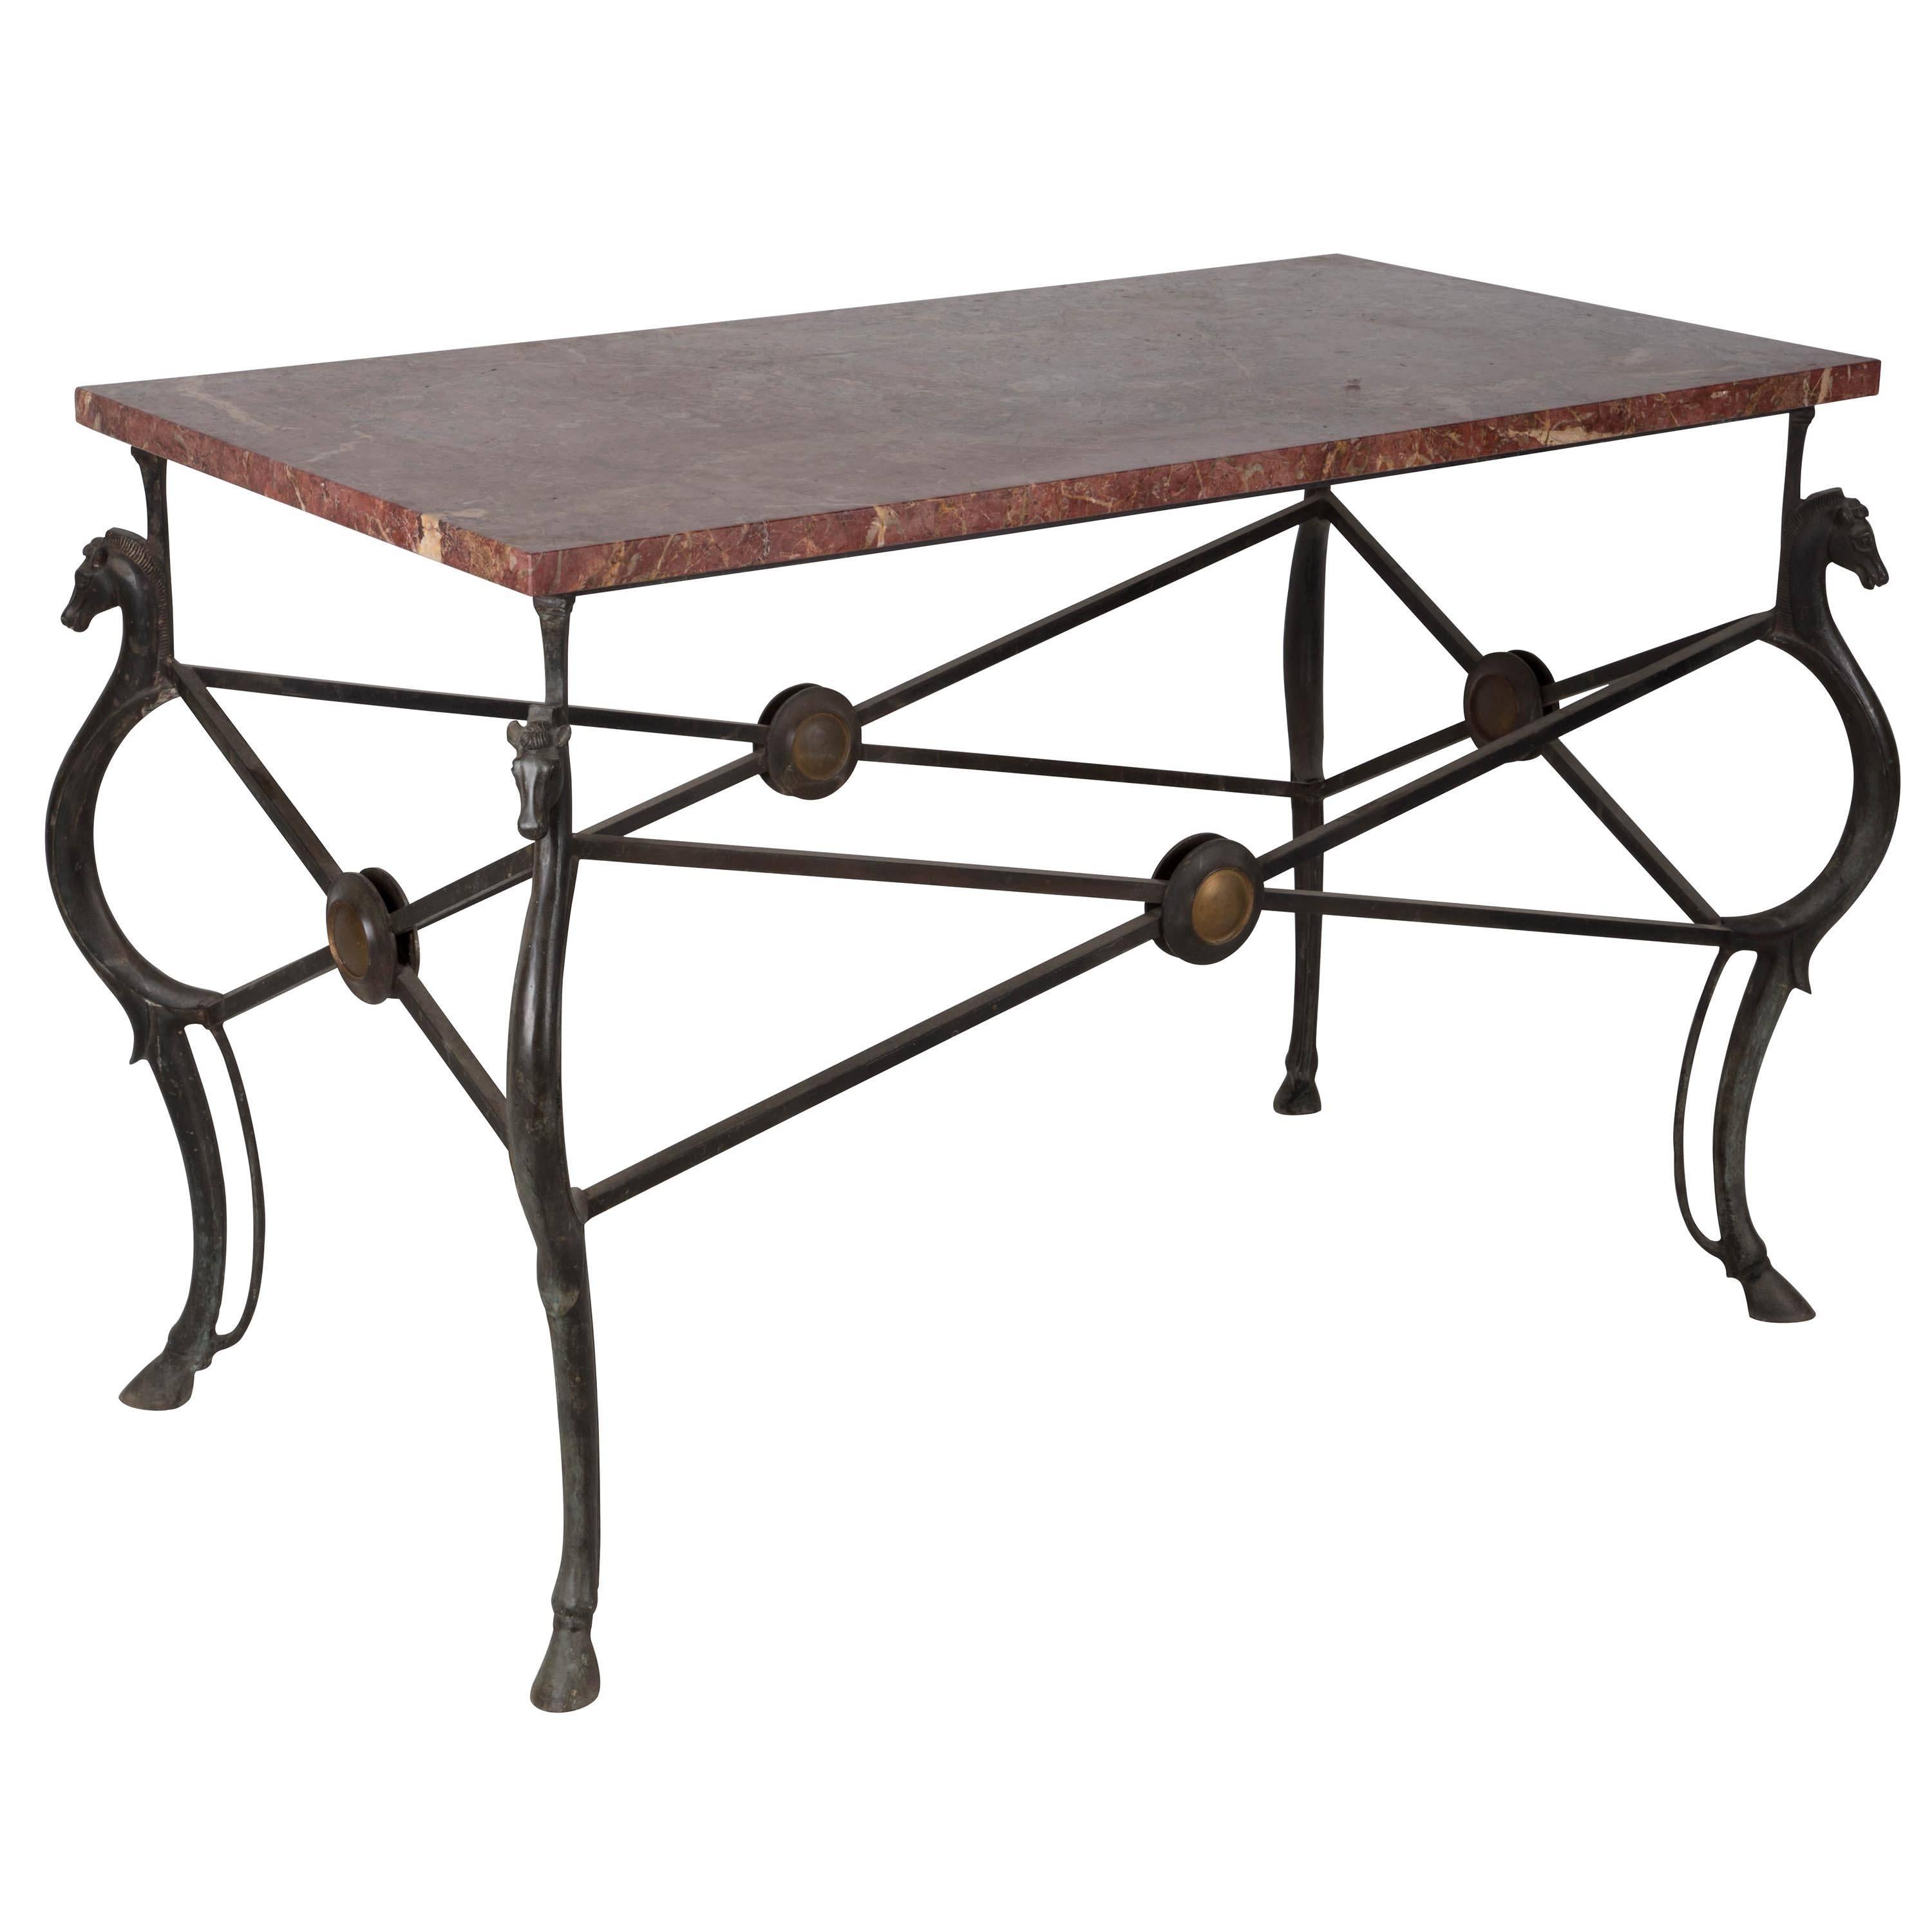 Horse head bronze table with Rosso Imperio marble top. Attributed to Gilbert Poillerat, circa 1935.